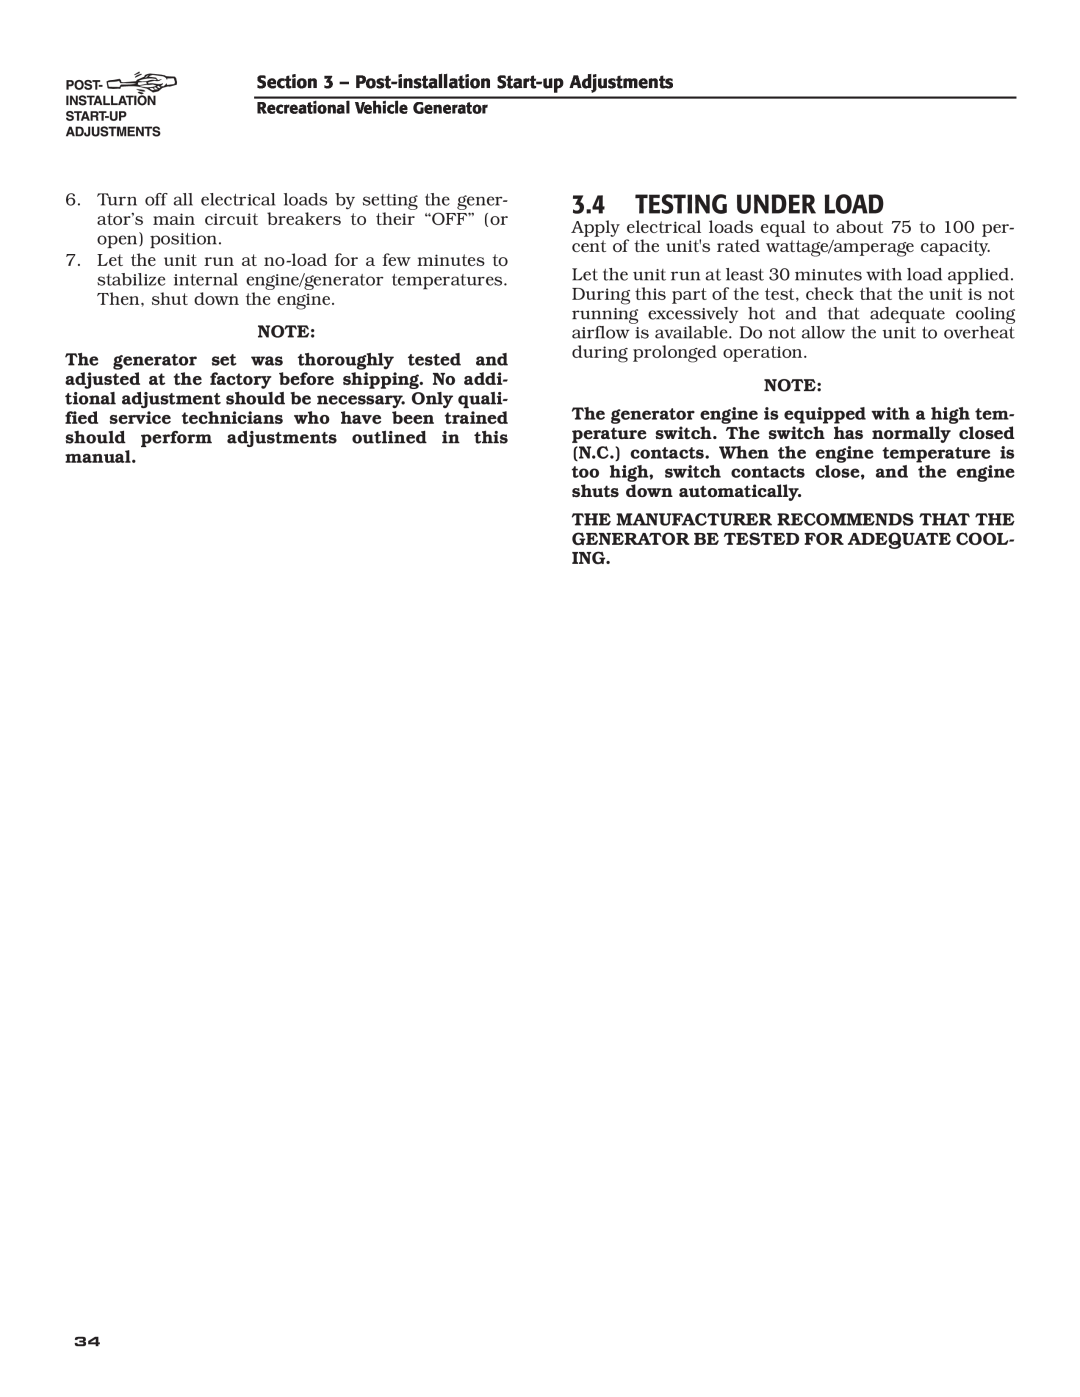 Generac Power Systems 004701-0 owner manual 3.4TESTING UNDER LOAD 